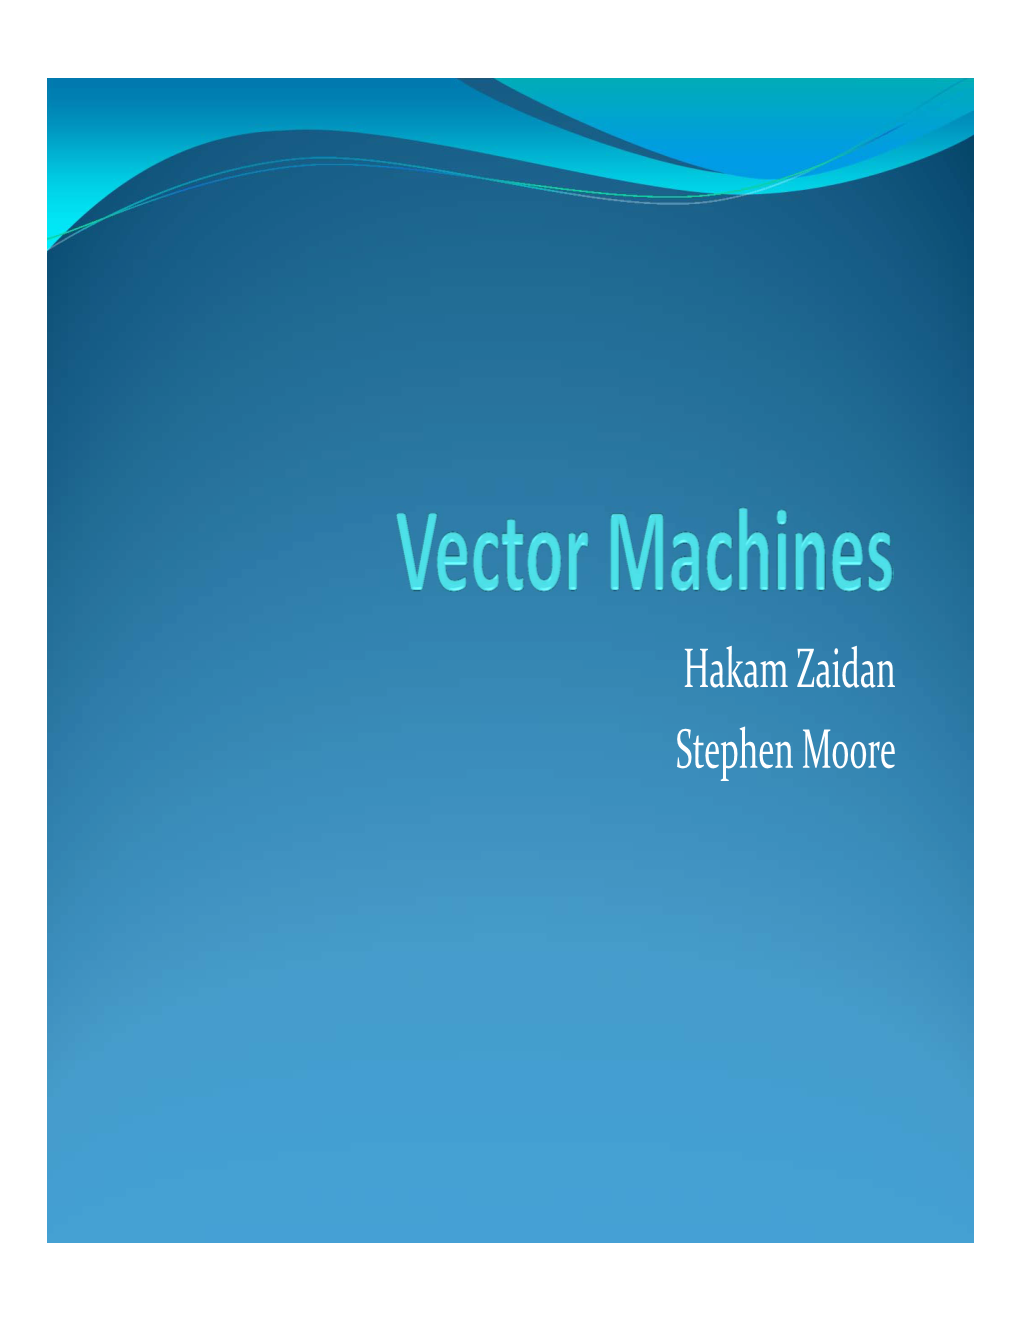 Vector Machines  Vector Machines Today Introduction  a Vector Processor Is a CPU That Can Run One Instructiononanentire Vector of Data